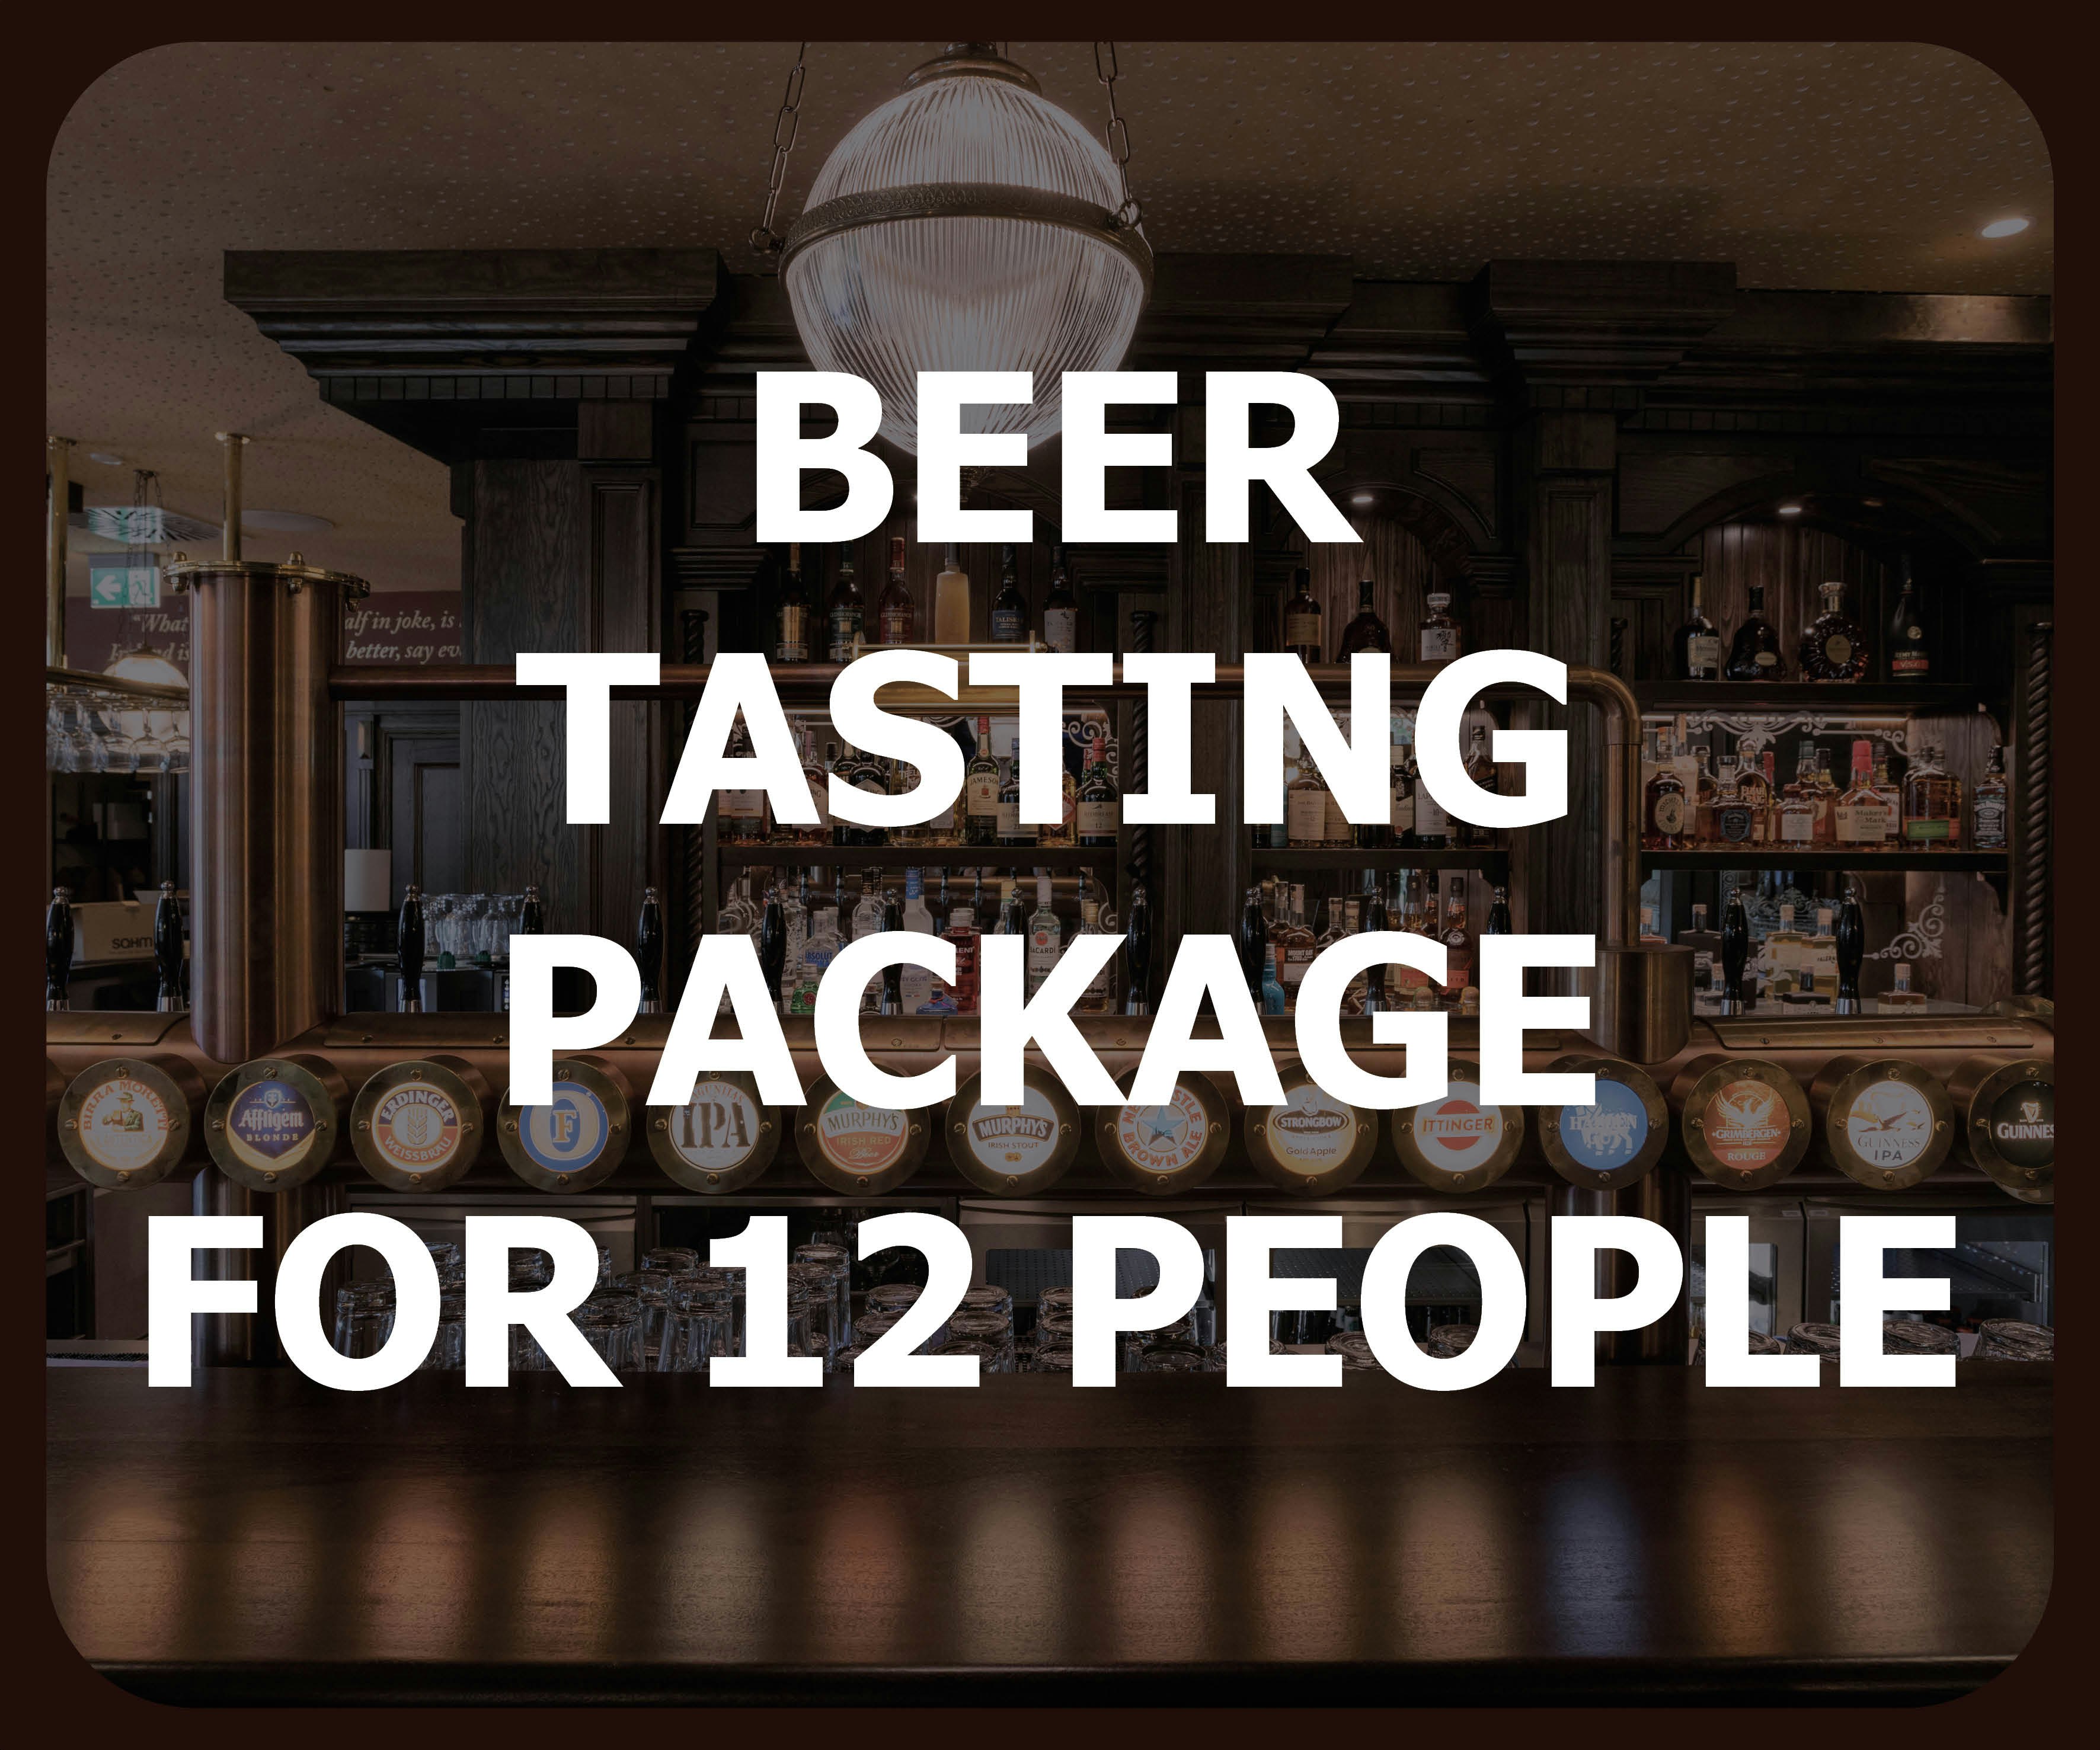 Beer tasting at the Willow Yard Pub - package for 12 people